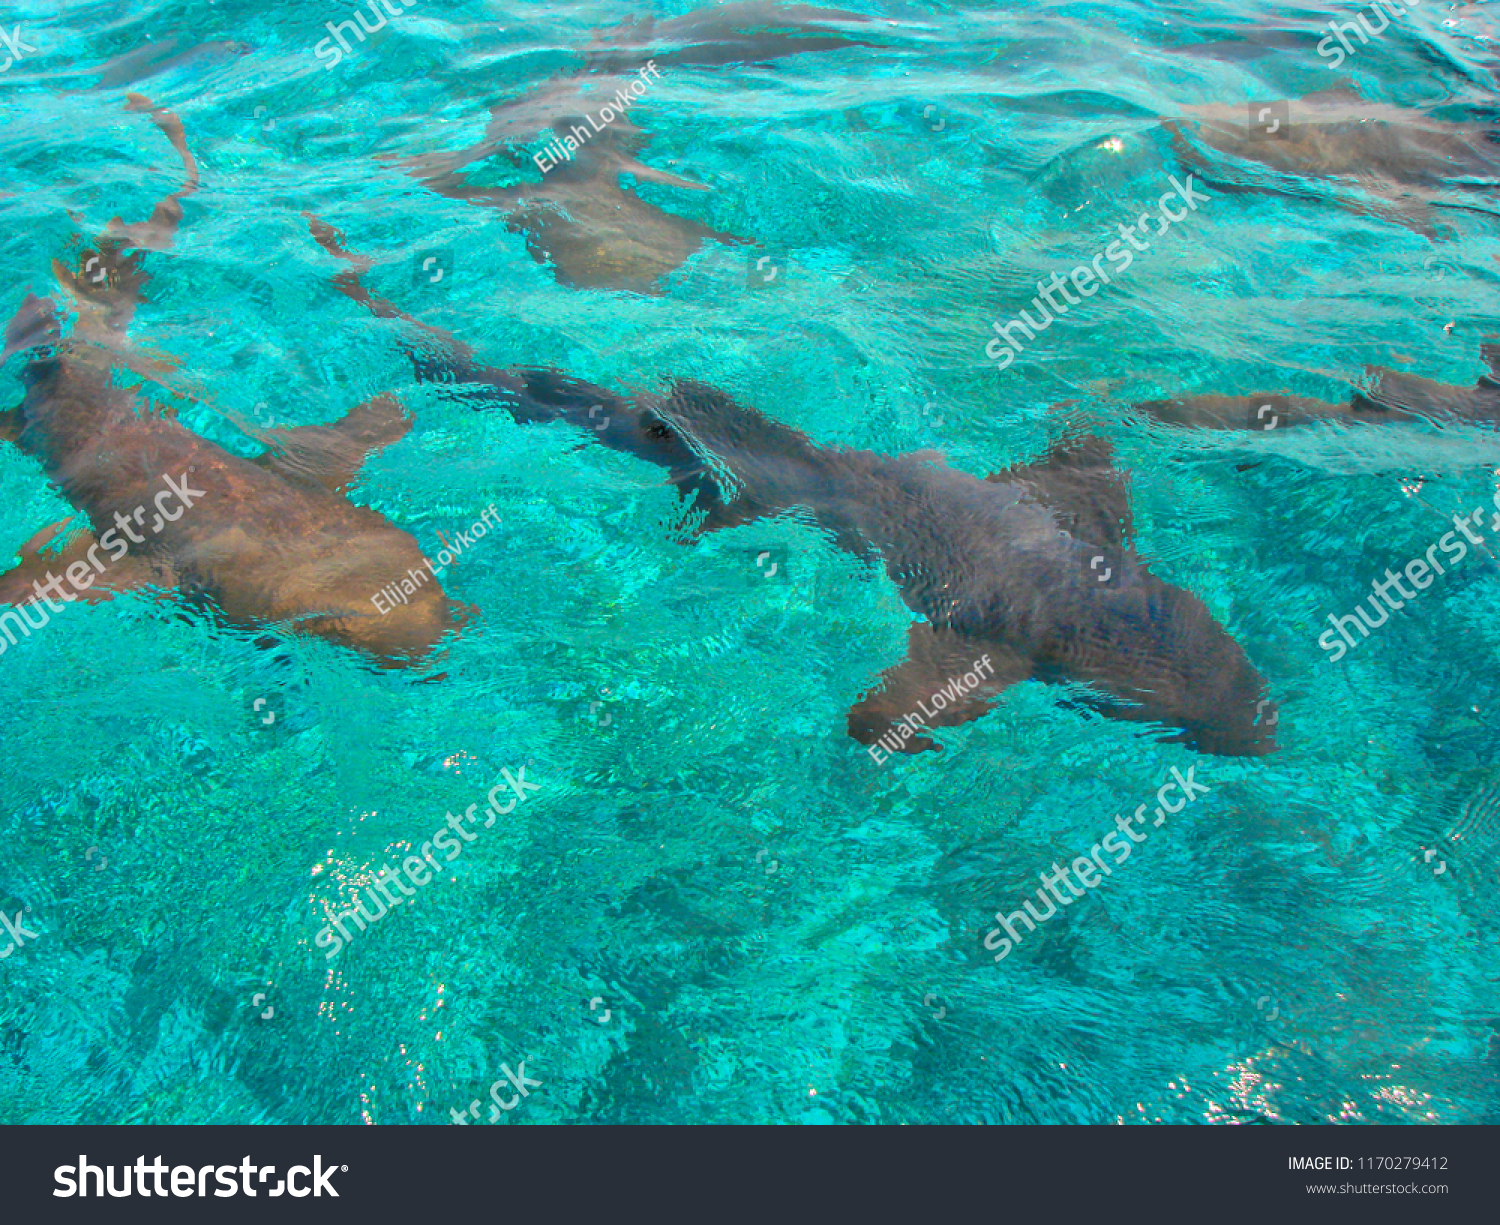 Swimming with sea animals in Hol Chan Marine Reserve, Belize #1170279412